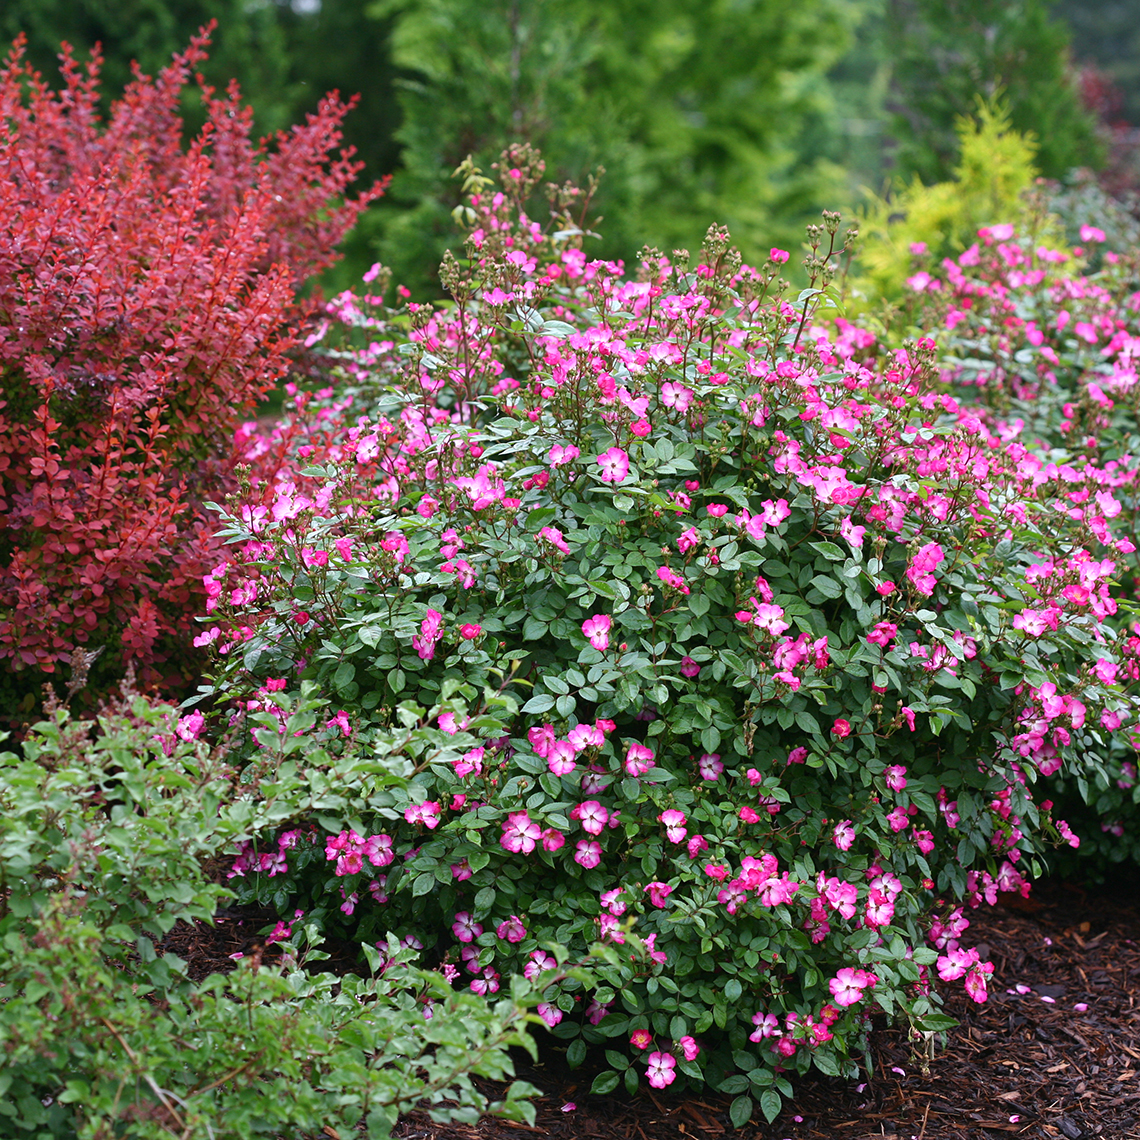 Oso Happy Smoothie Rose abundant pink blooms in garden bed